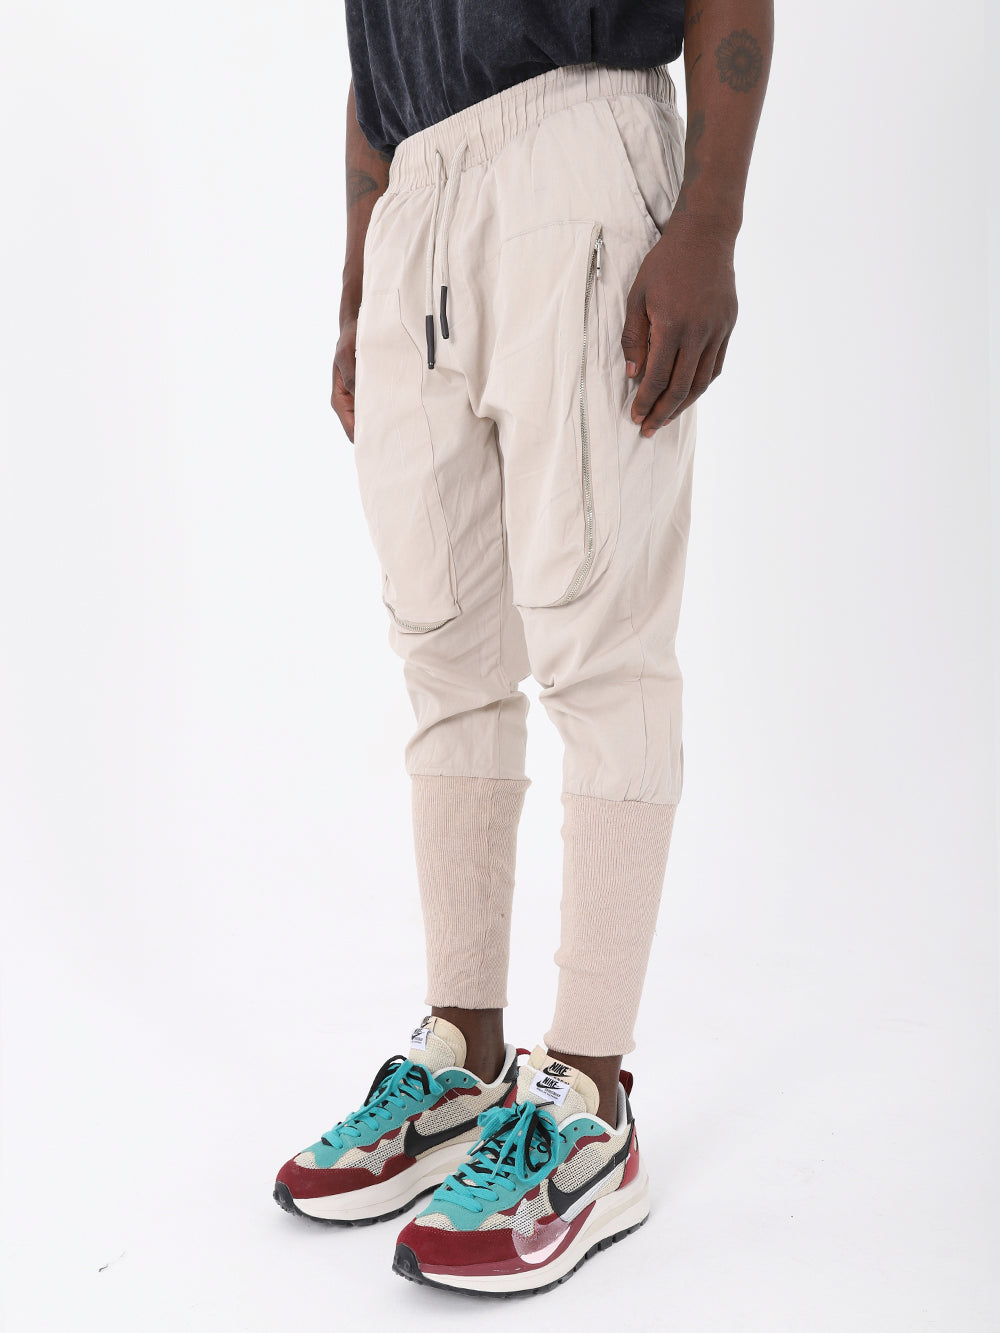 A fashionable man wearing ALTIS JOGGERS with an adjustable drawstring waist, paired with sneakers.